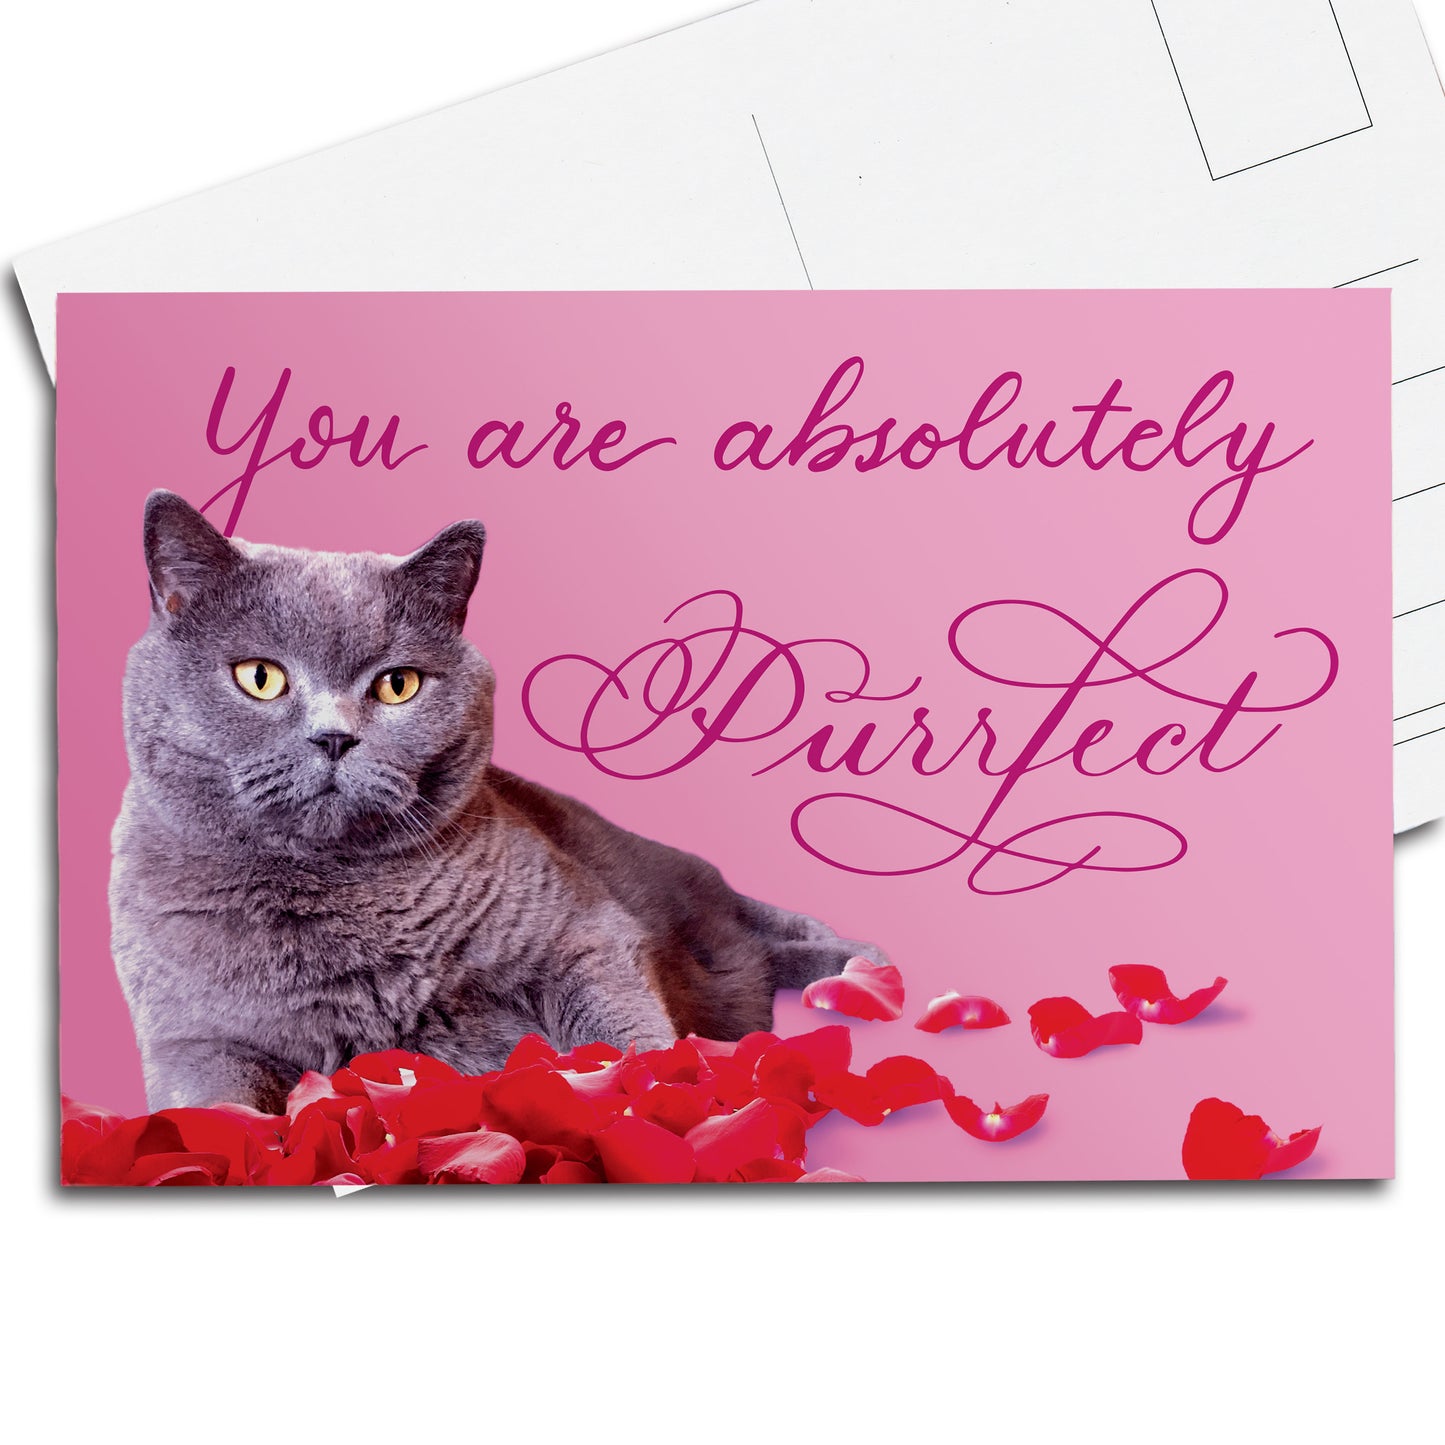 A thumbnail view of the postcard: "You are absolutely Purrfect"